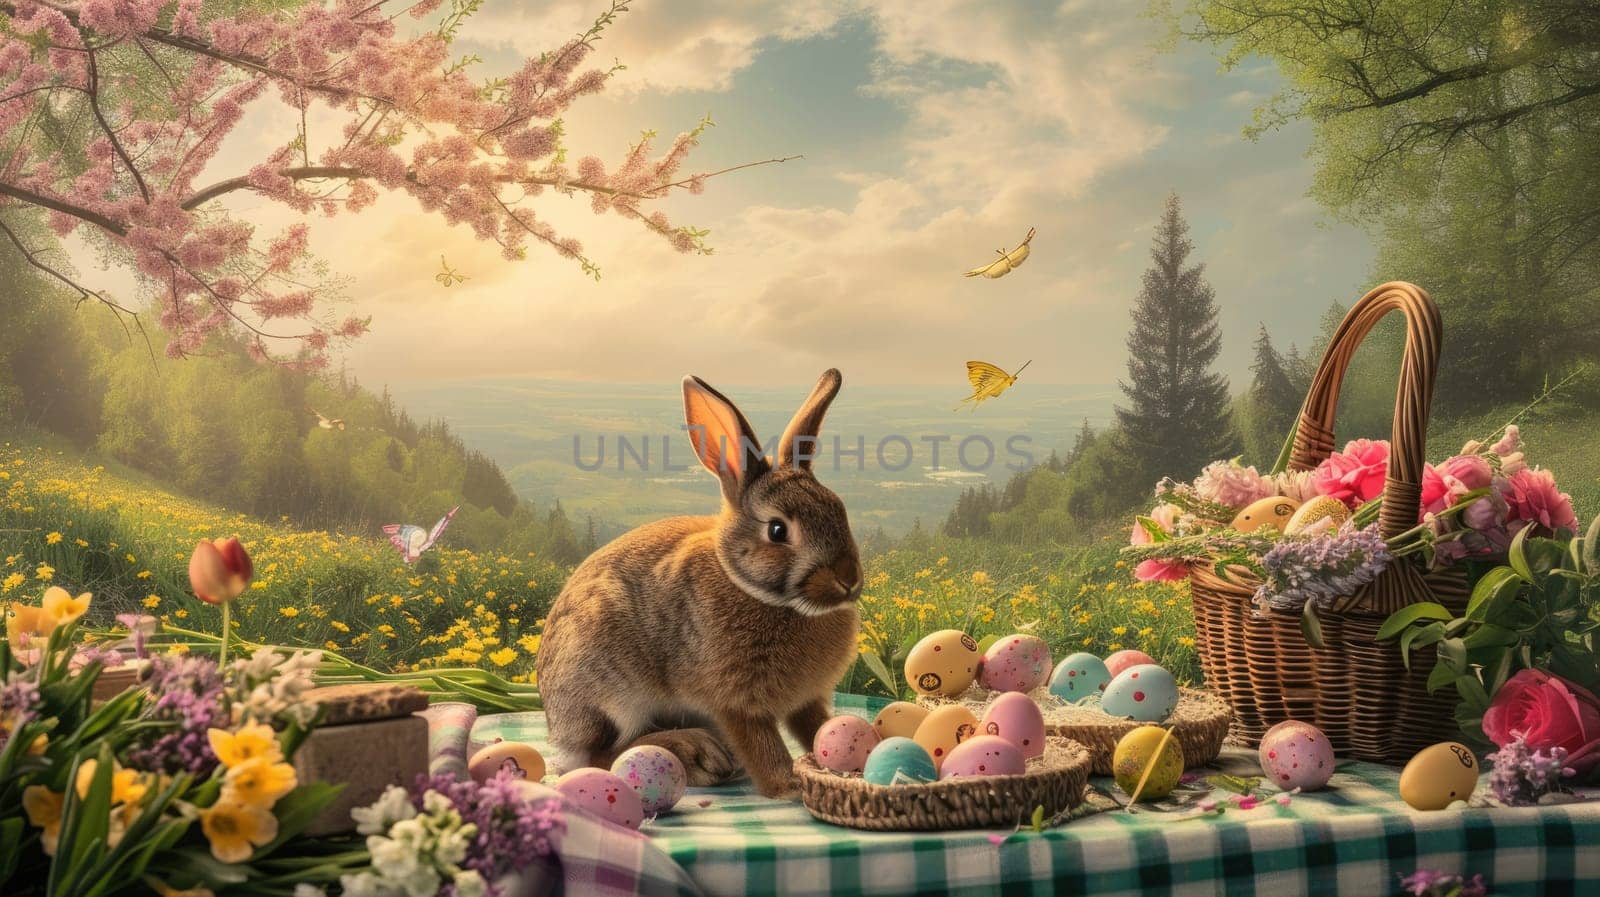 Under the clear blue sky, the rabbit sits on a picnic table surrounded by Easter eggs and lush green grass. The natural beauty of the scene resembles a piece of art in nature AIG42E